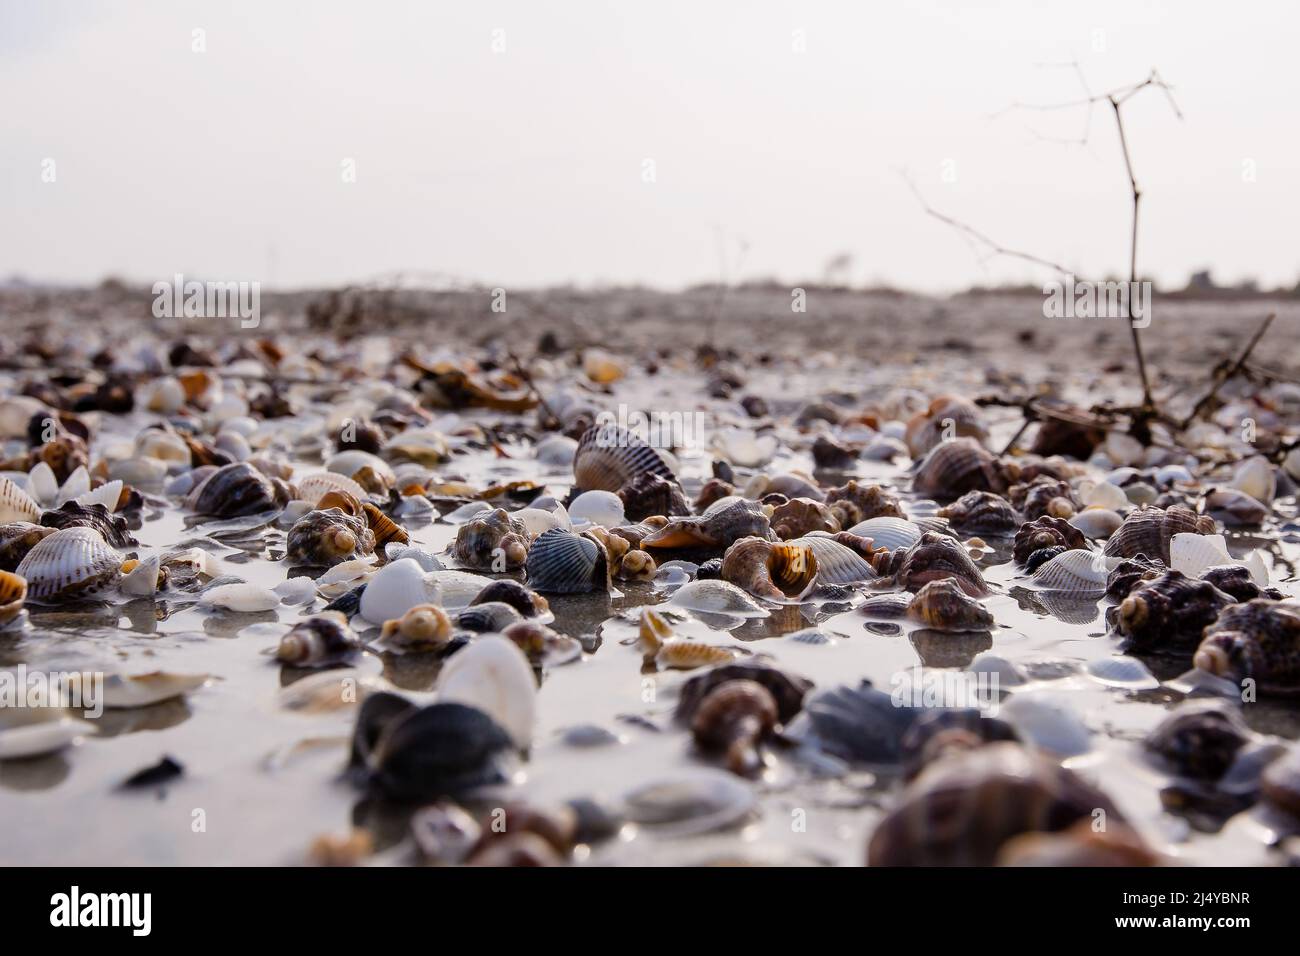 Lots of seashells on an empty beach washed by the sea waves Stock Photo